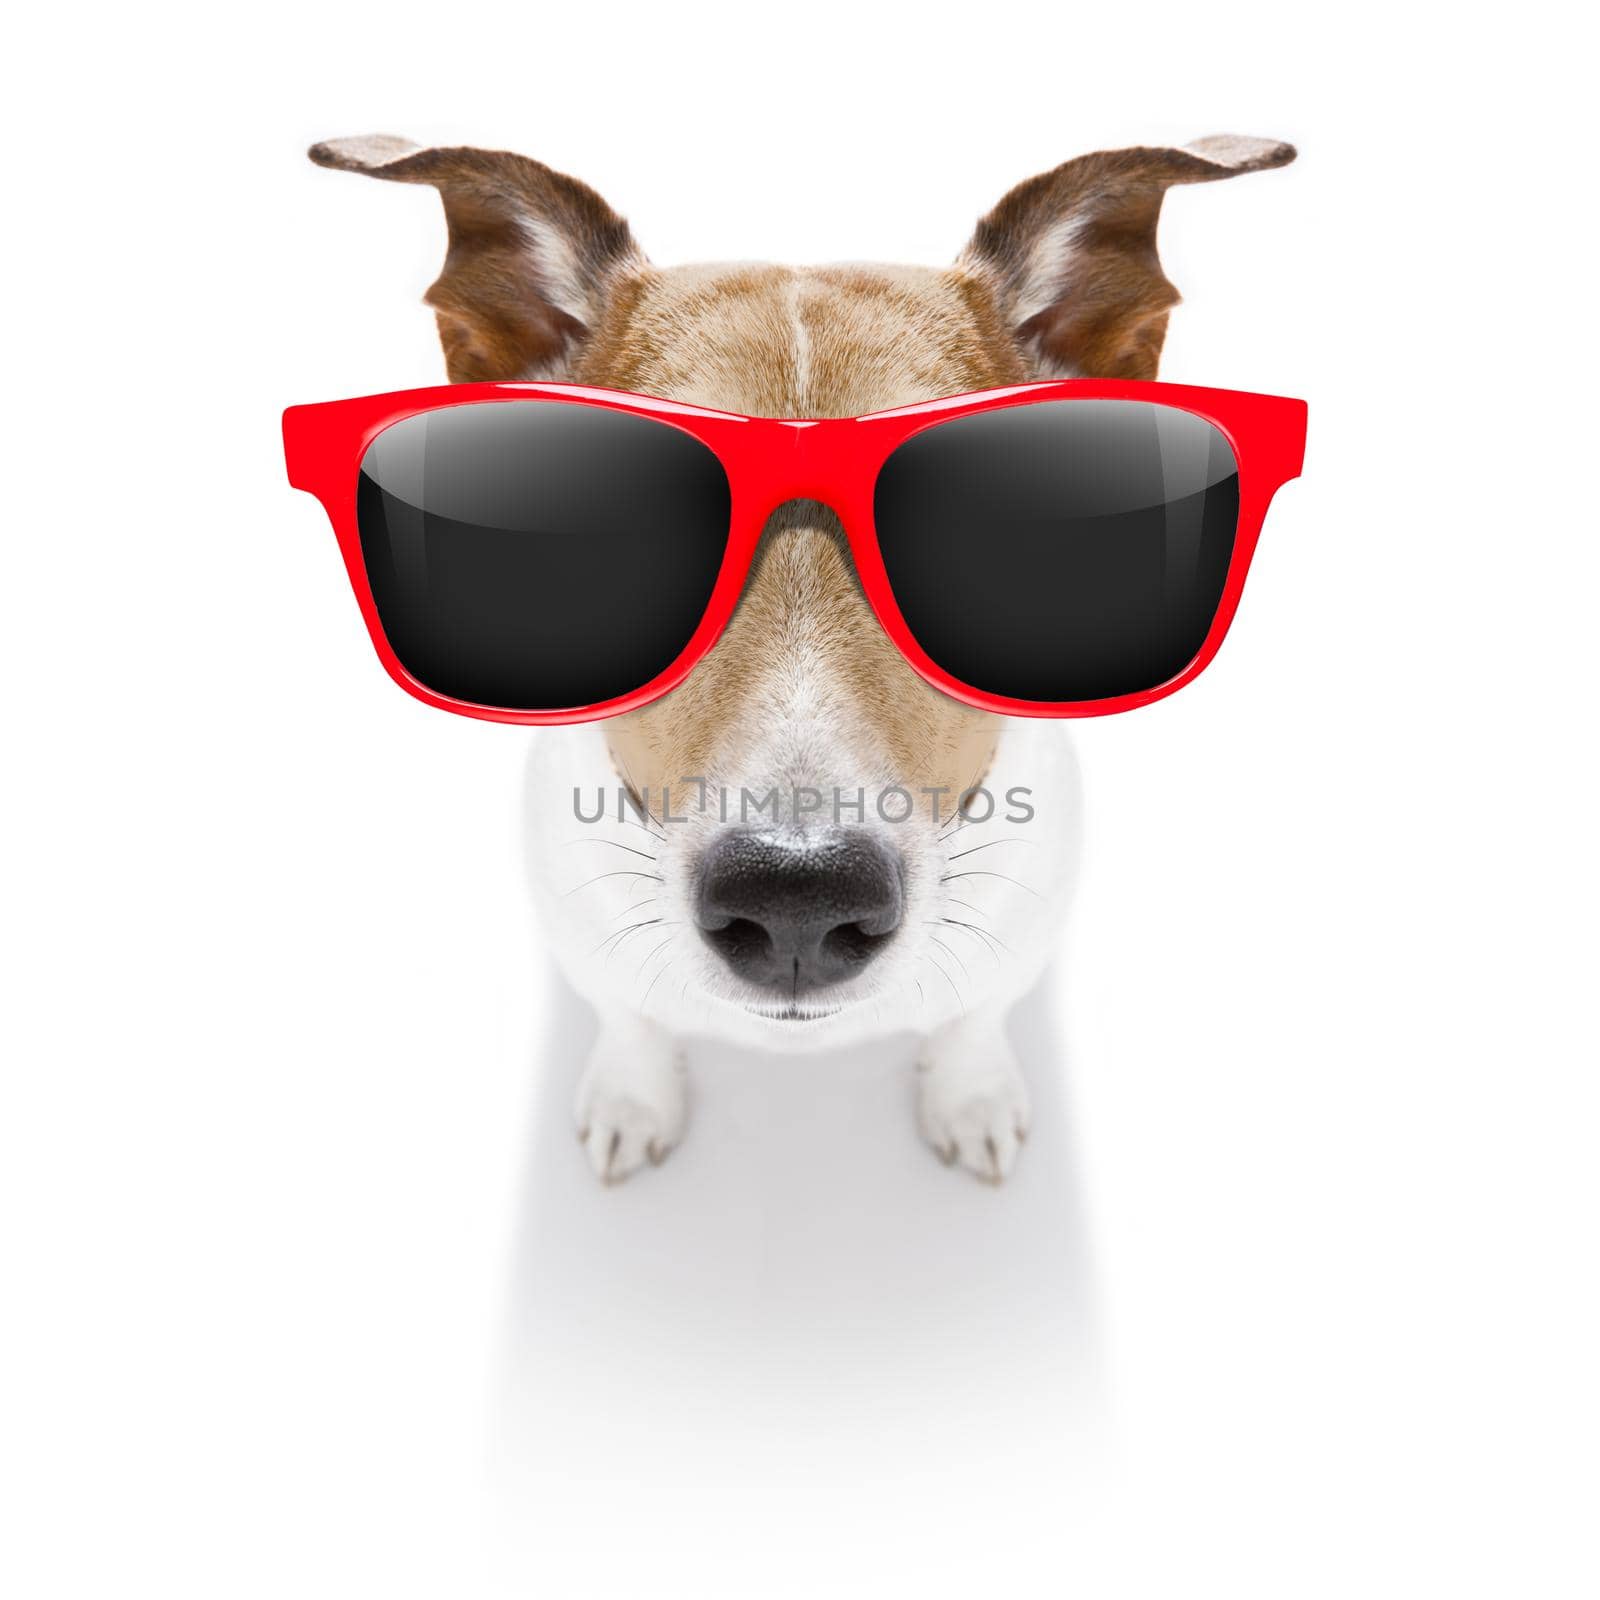 curious jack russell dog looking up to owner waiting or sitting patient to play or go for a walk,  isolated on white background, wearing sunglasses